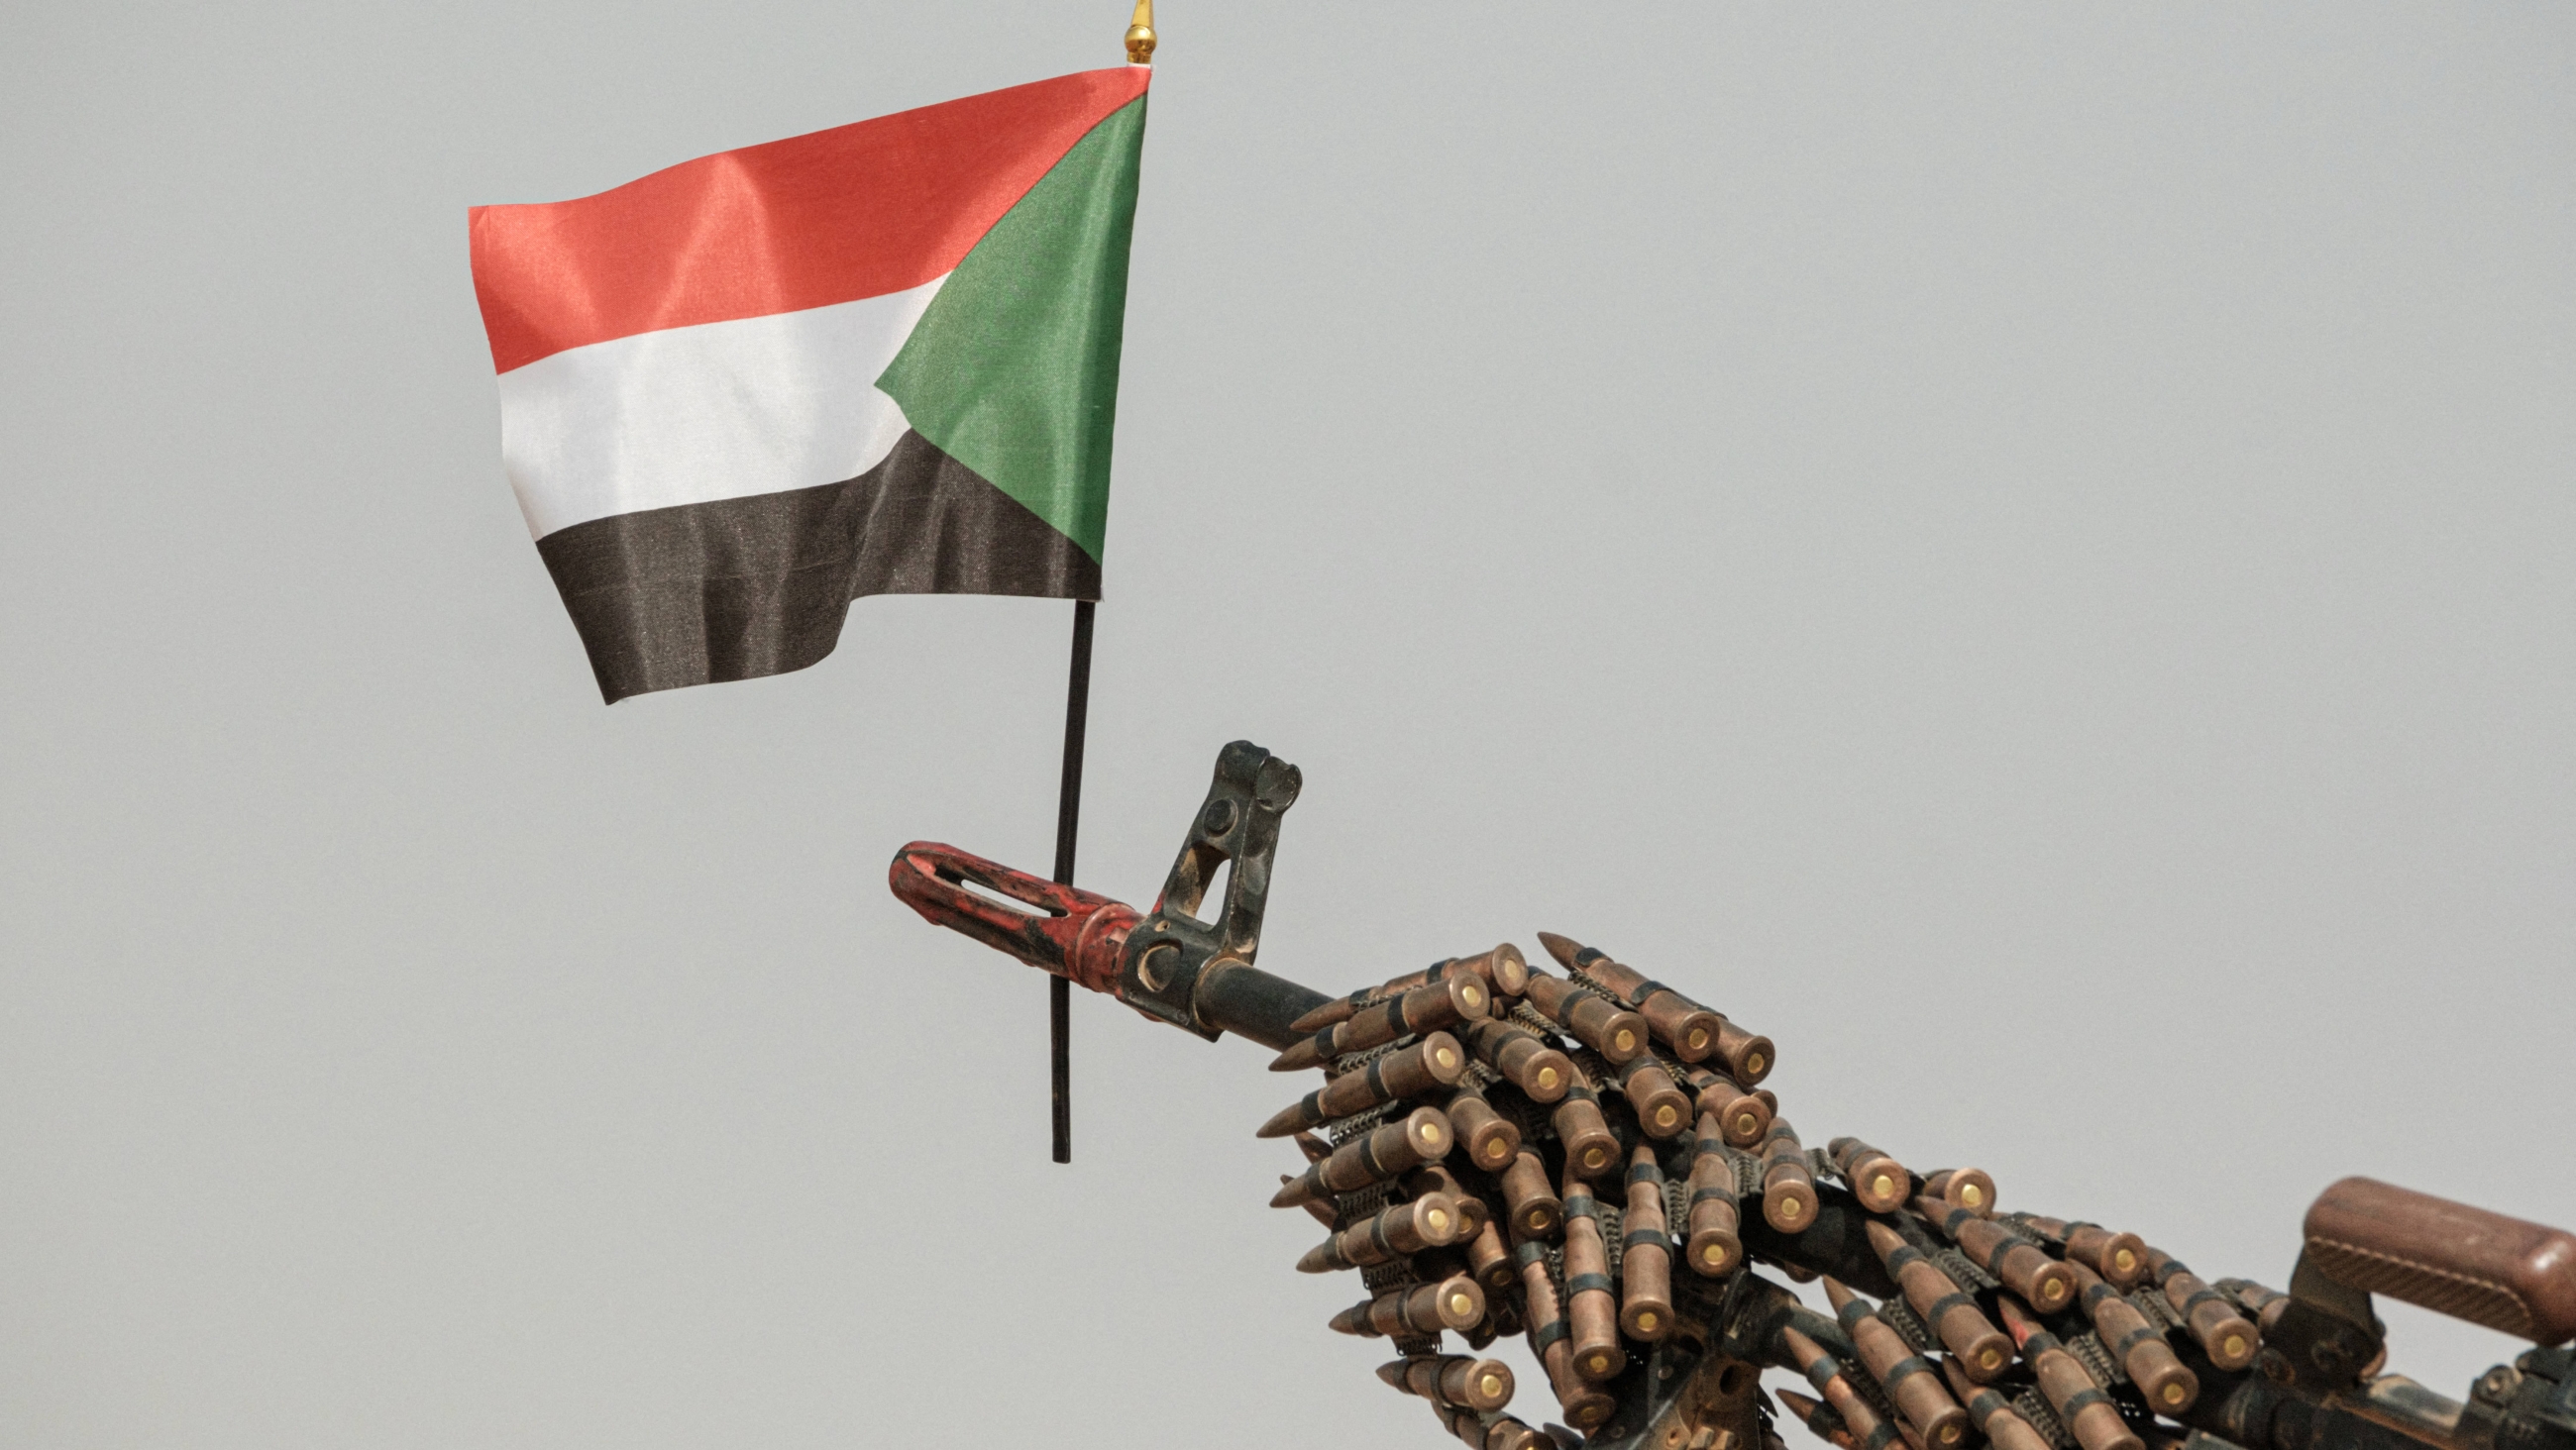 A Sudanese flag placed above the muzzle of a machine gun covered with an ammunition belt of the Rapid Support Forces (RSF) paramilitaries before a rally for supporters in northwest of Khartoum on 22 June 2019 (AFP)